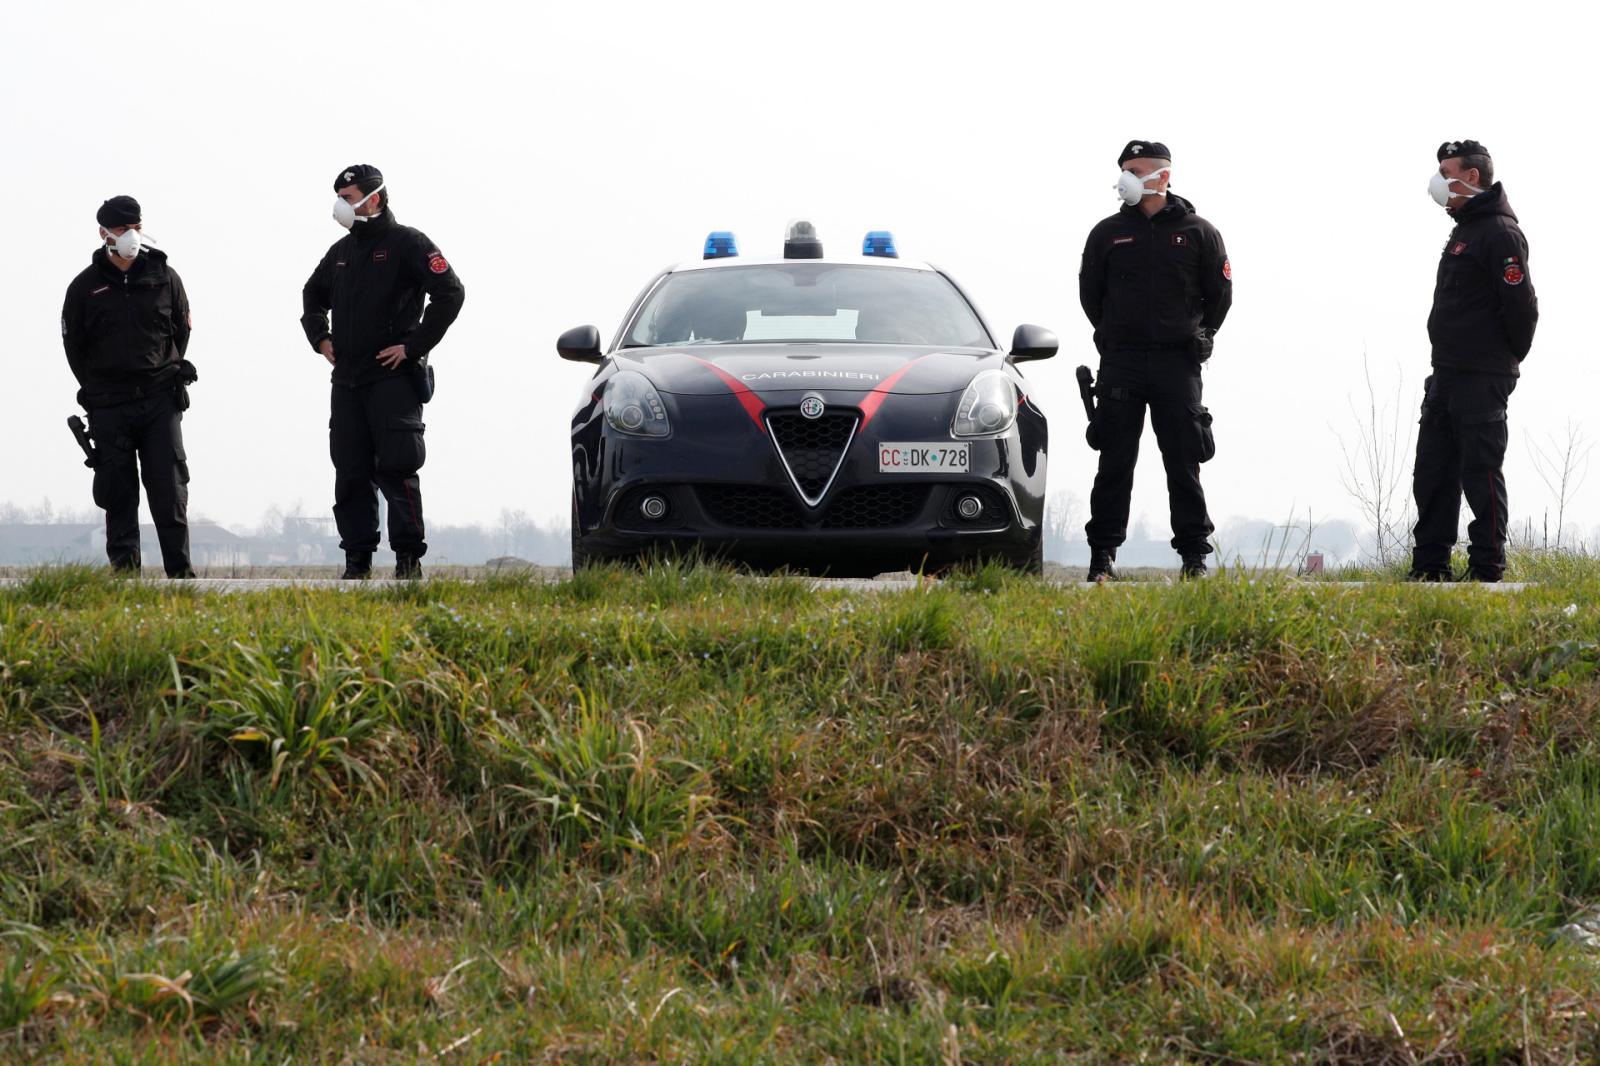 Carabinieri officers patrol outside the town of Castiglione D'Adda, which has been closed by the Italian government due to a coronavirus outbreak, Italy, February 23, 2020. REUTERS/Guglielmo Mangiapane